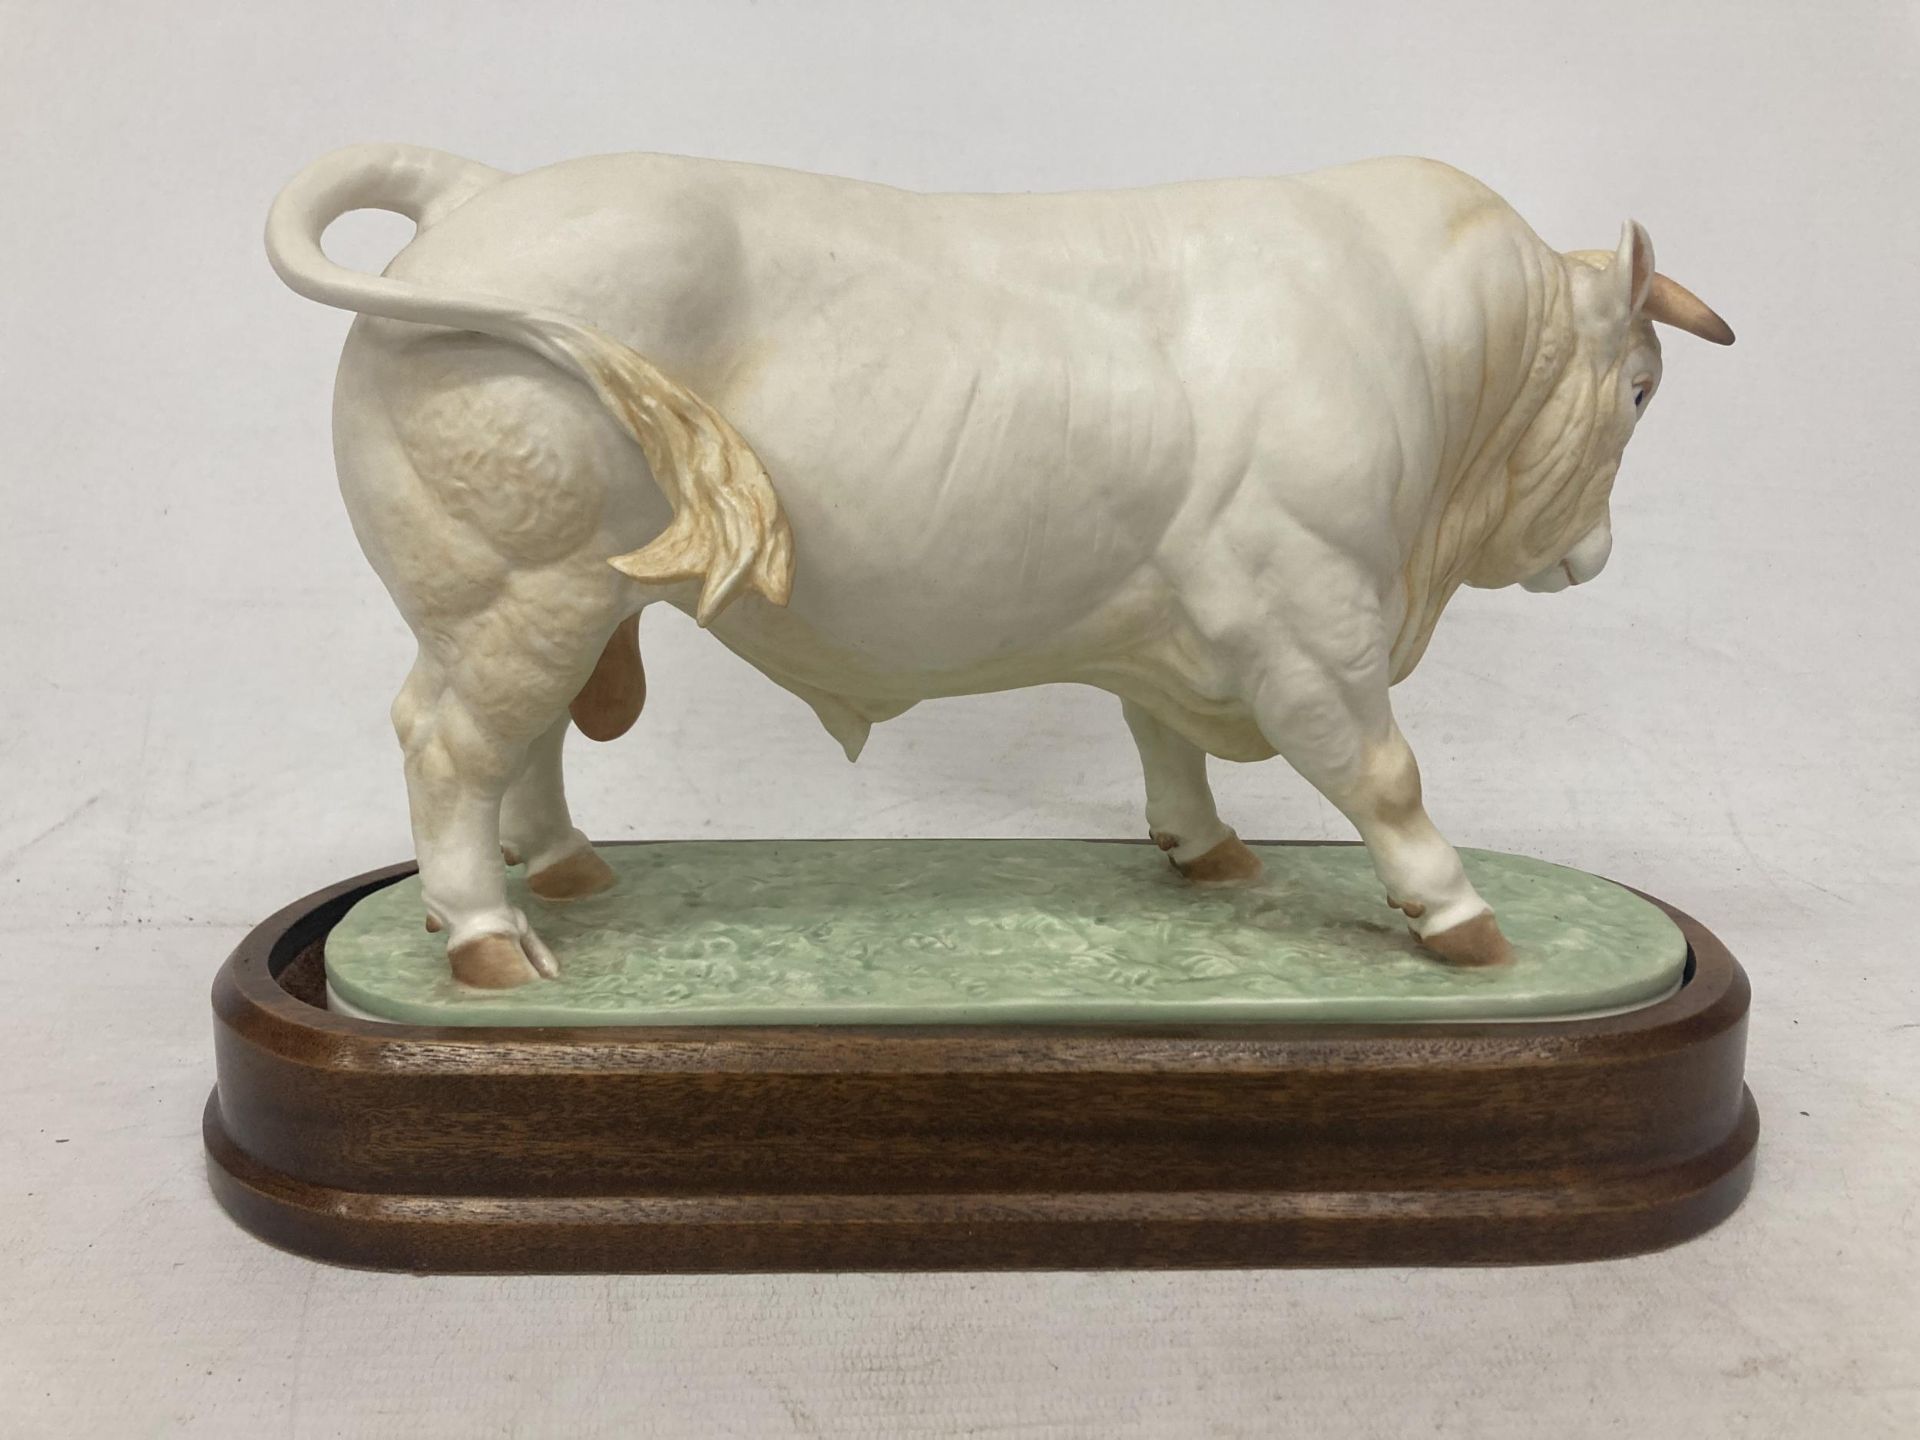 A ROYAL WORCESTER MODEL OF A CHAROLAIS BULL MODELLED BY DORIS LINDNER AND PRODUCED IN A LIMITED - Image 3 of 5